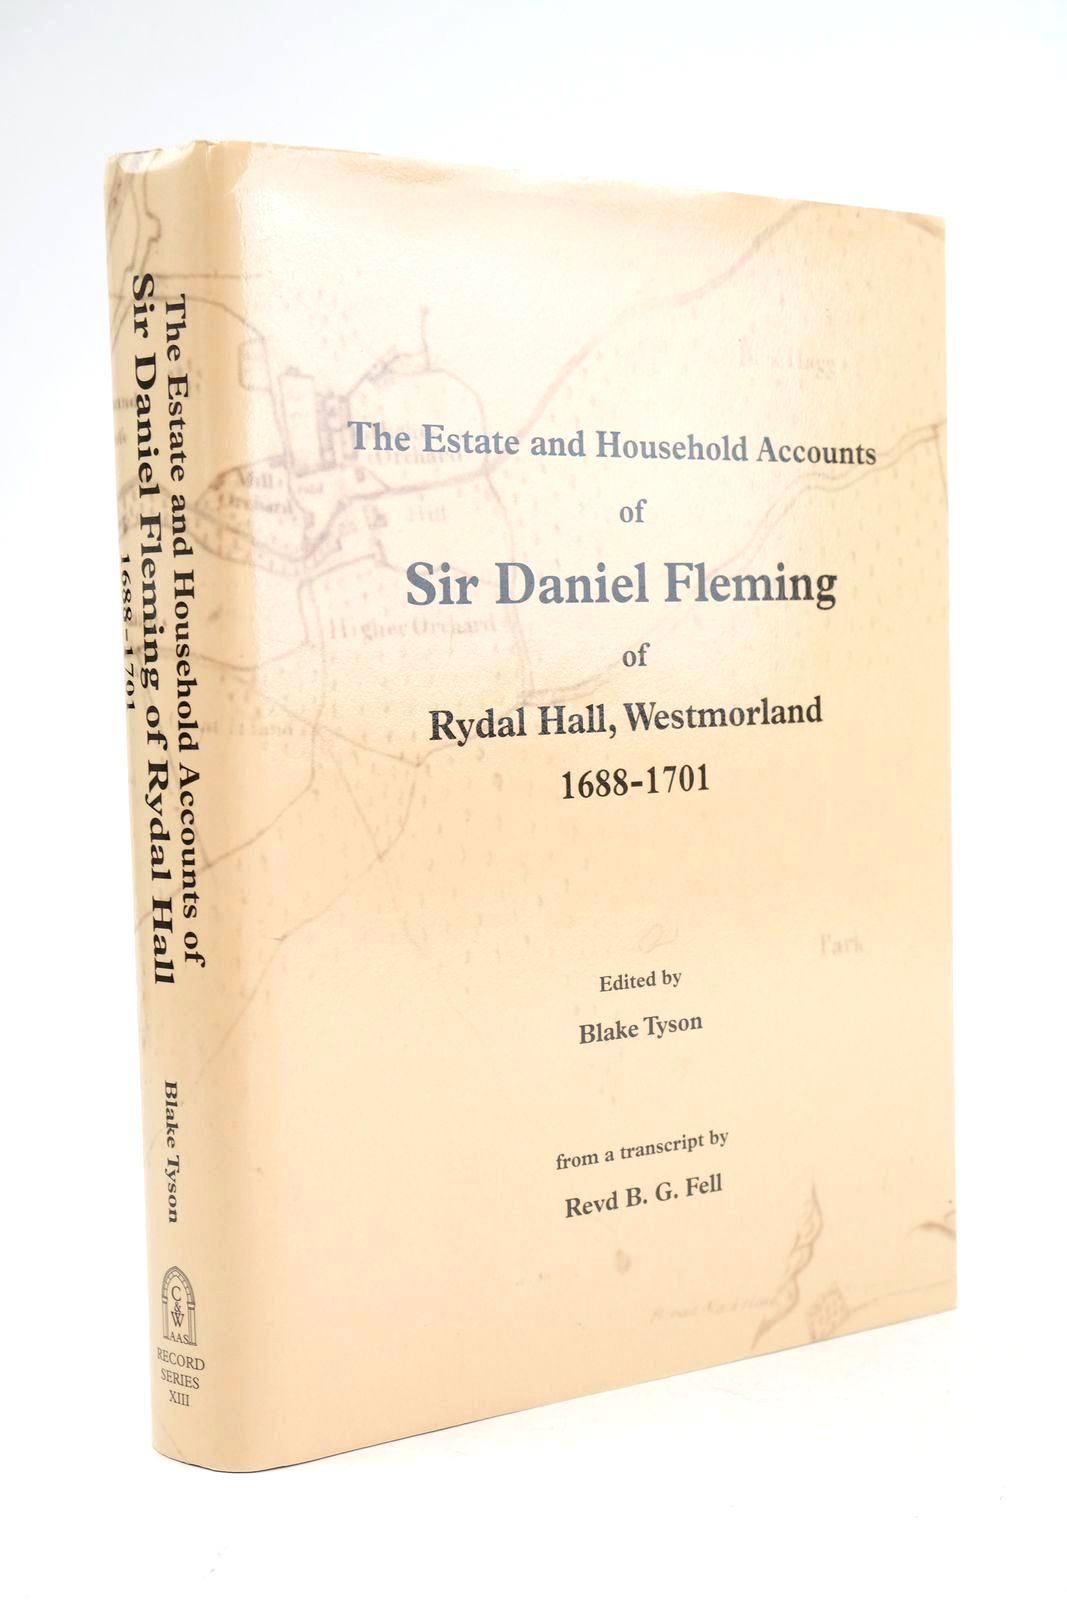 Photo of THE ESTATE AND HOUSEHOLD ACCOUNTS OF SIR DANIEL FLEMING OF RYDAL HALL, WESTMORLAND FROM 1688-1701- Stock Number: 1325302